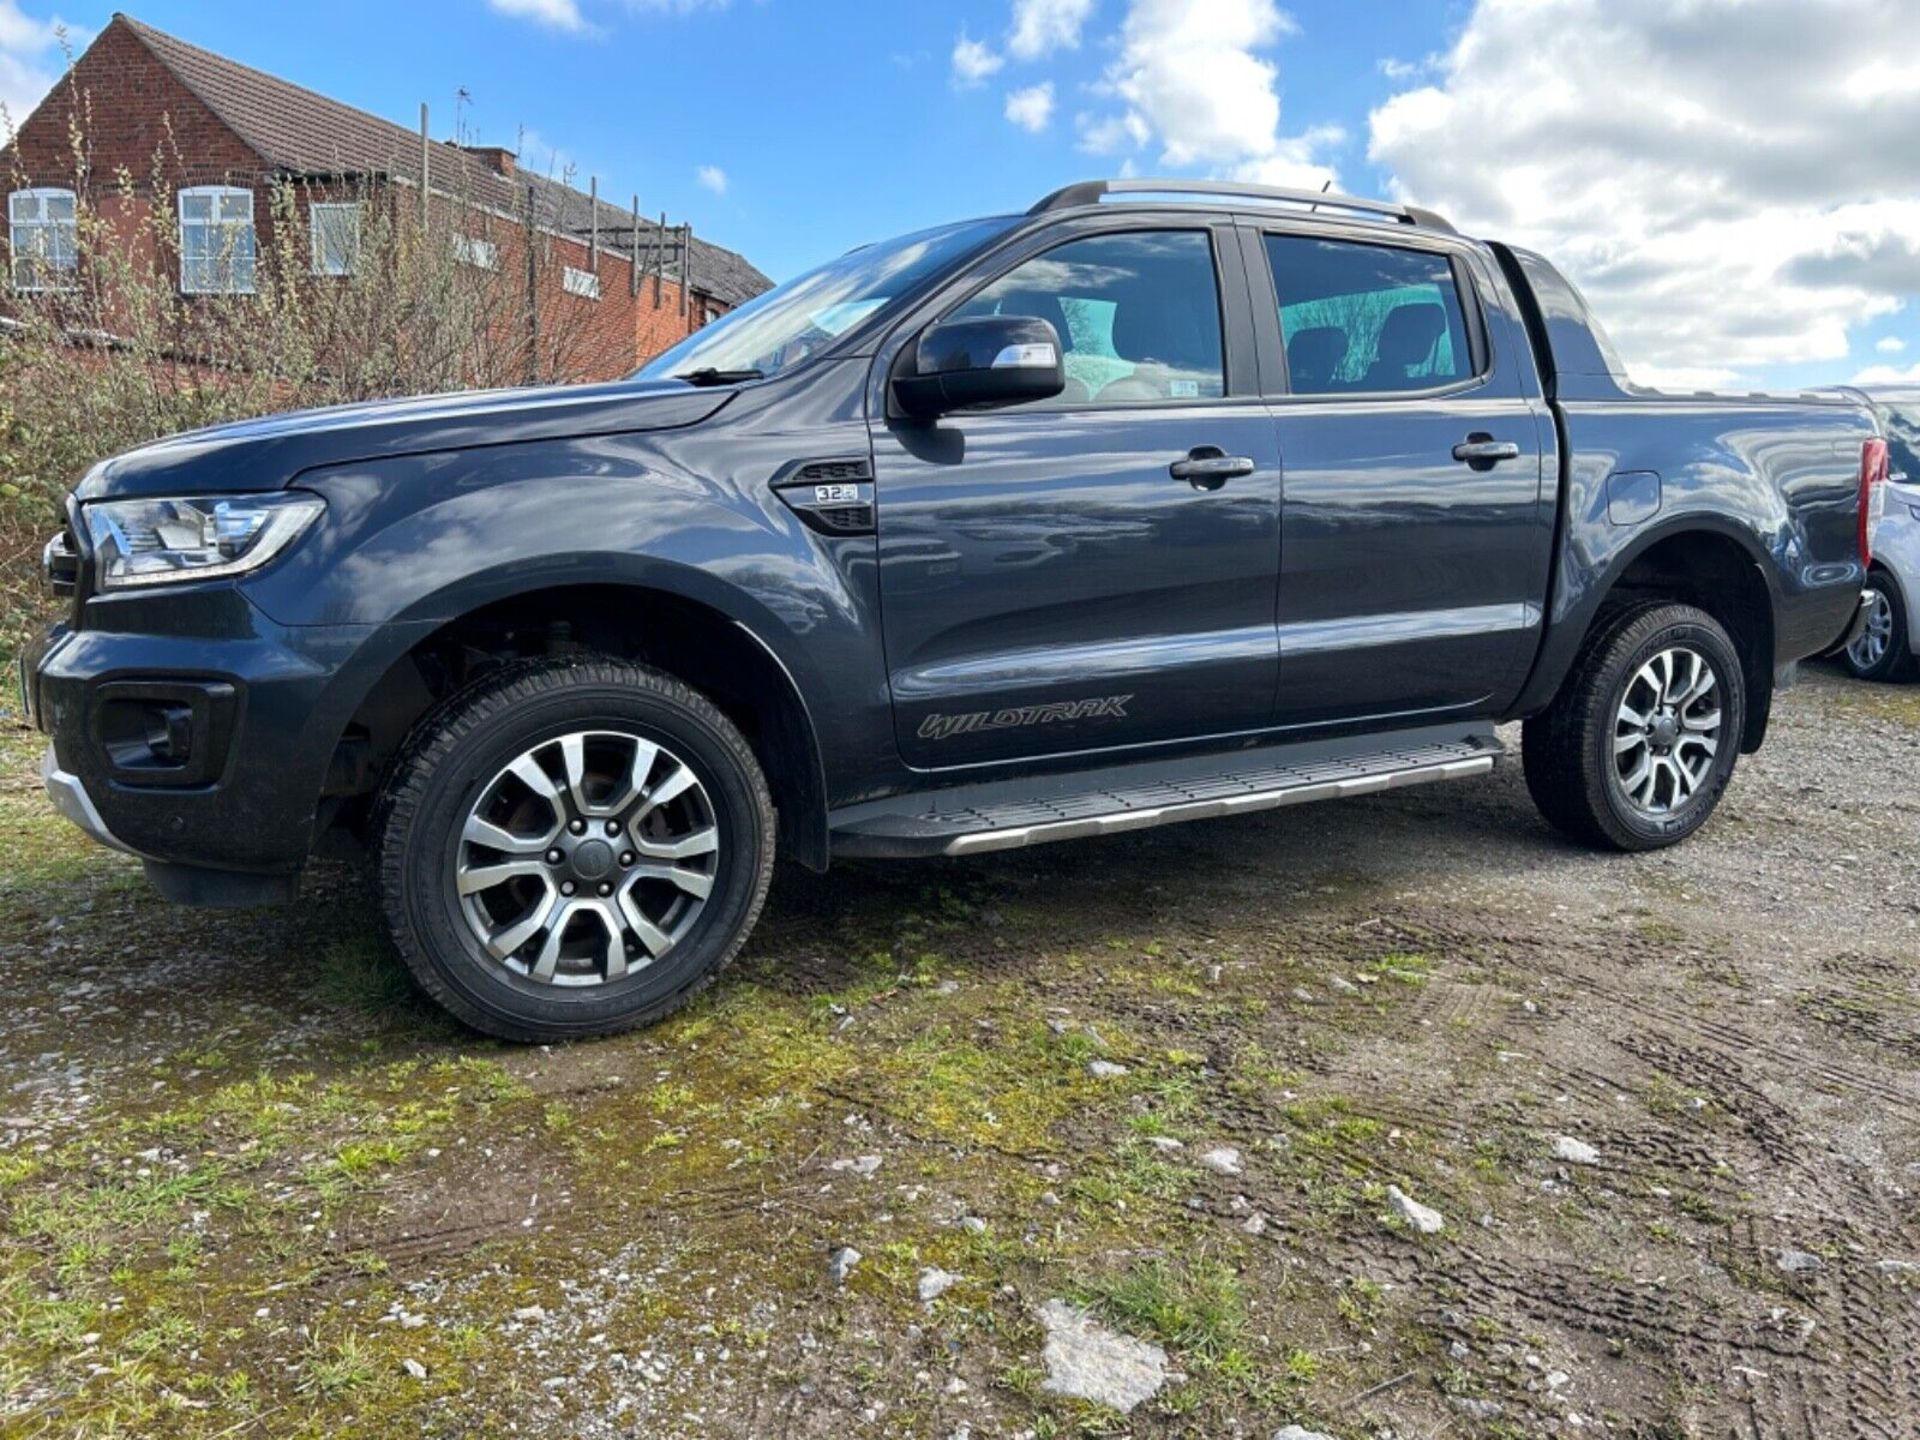 2020 FORD RANGER WILDTRAK 3.2 AUTOMATIC DOUBLE CAB PICKUP TRUCK 4WD EURO 6 *RESERVE JUST REDUCED*. - Image 2 of 14